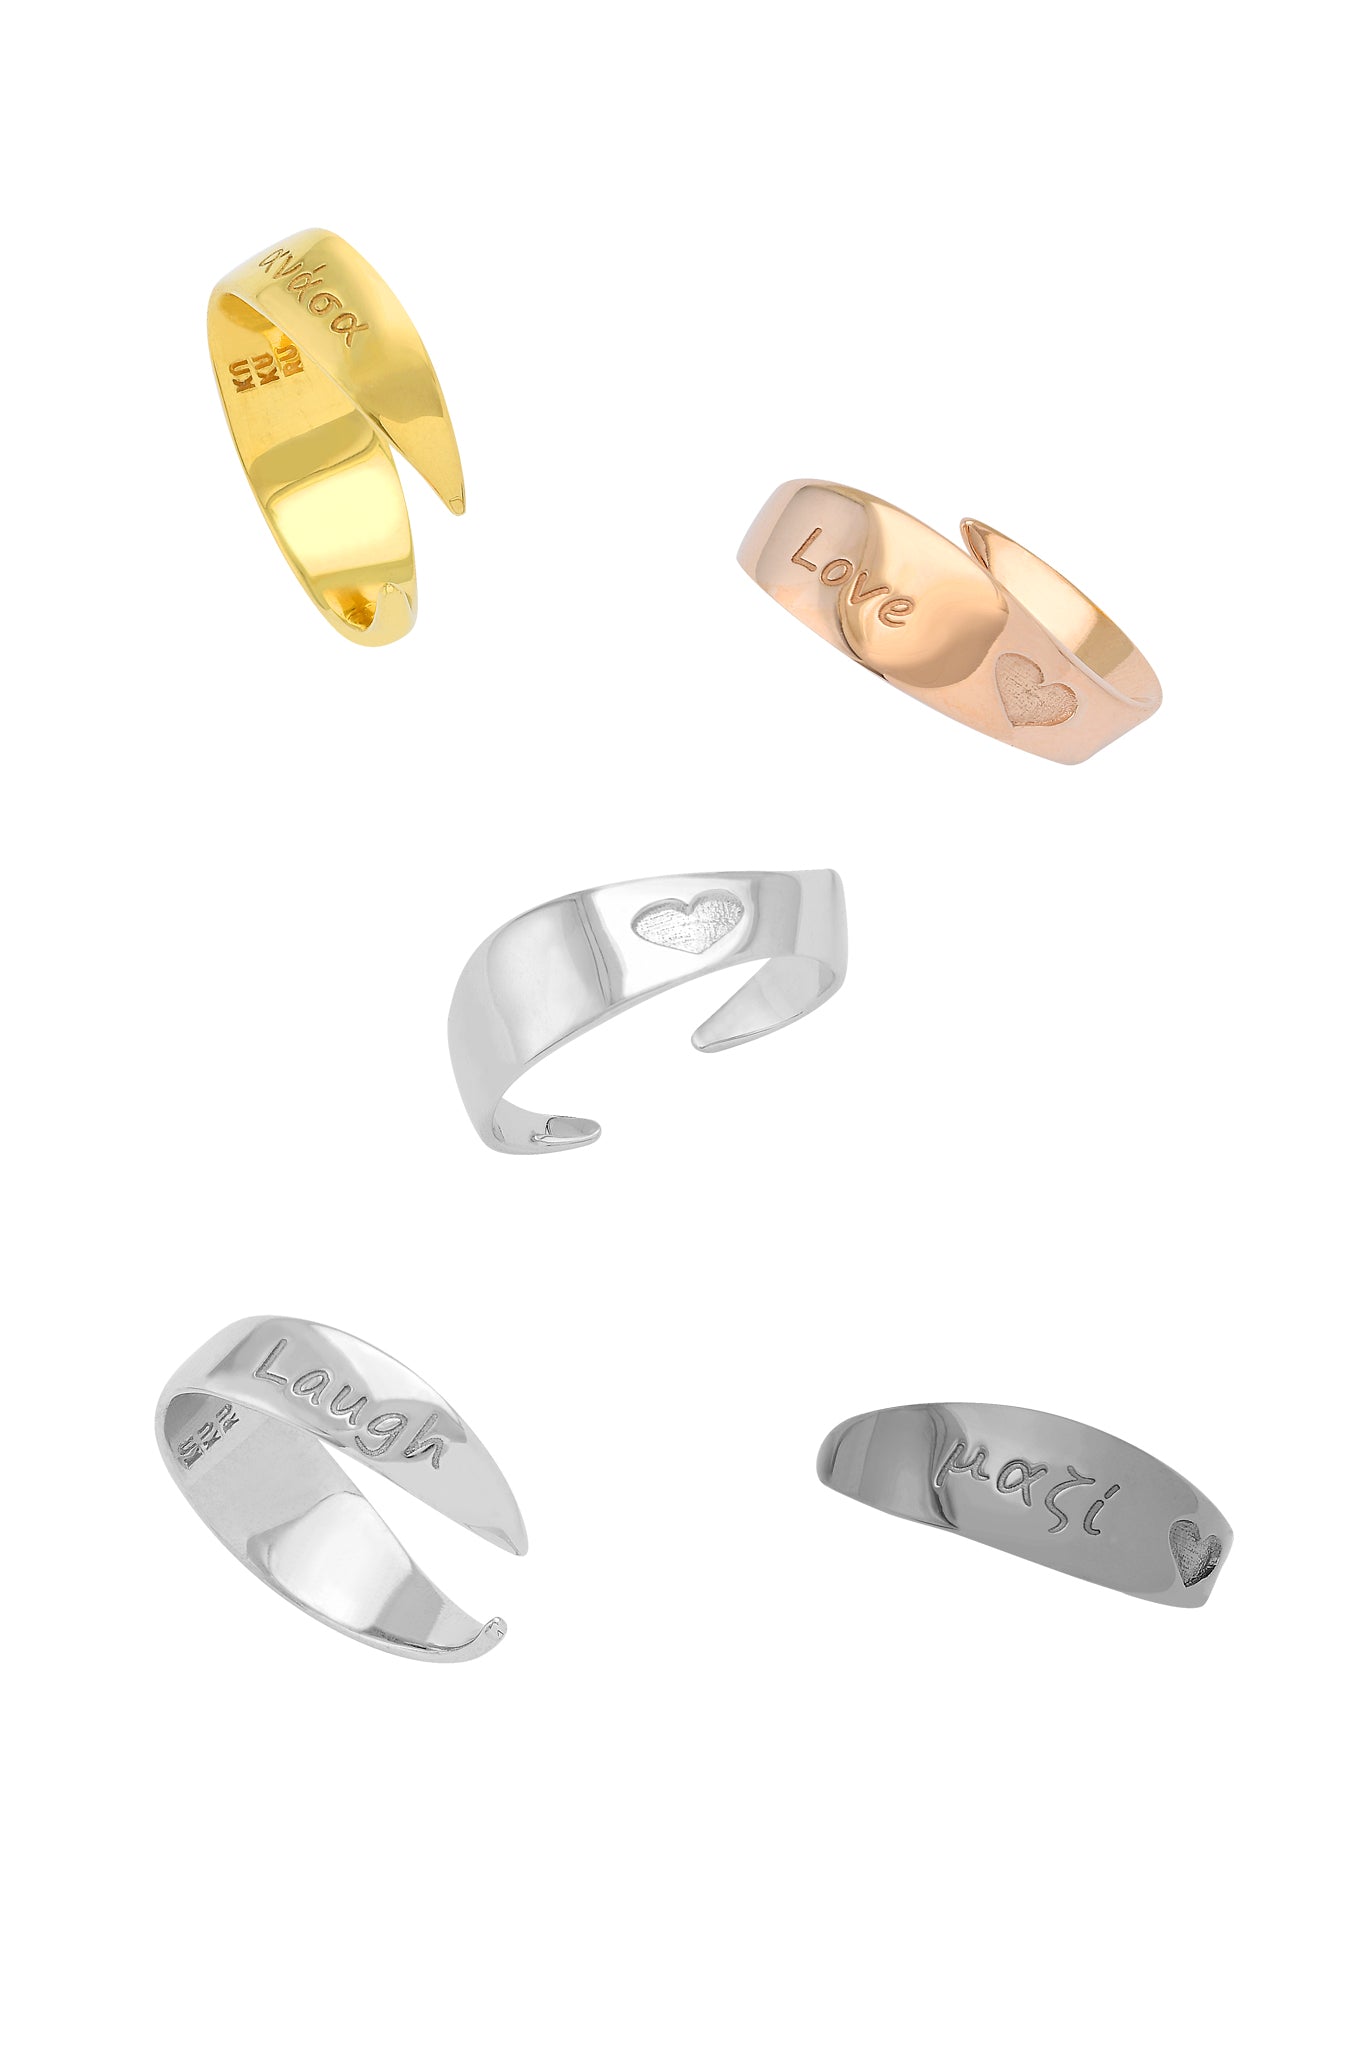 Large Personalized Agape Ring